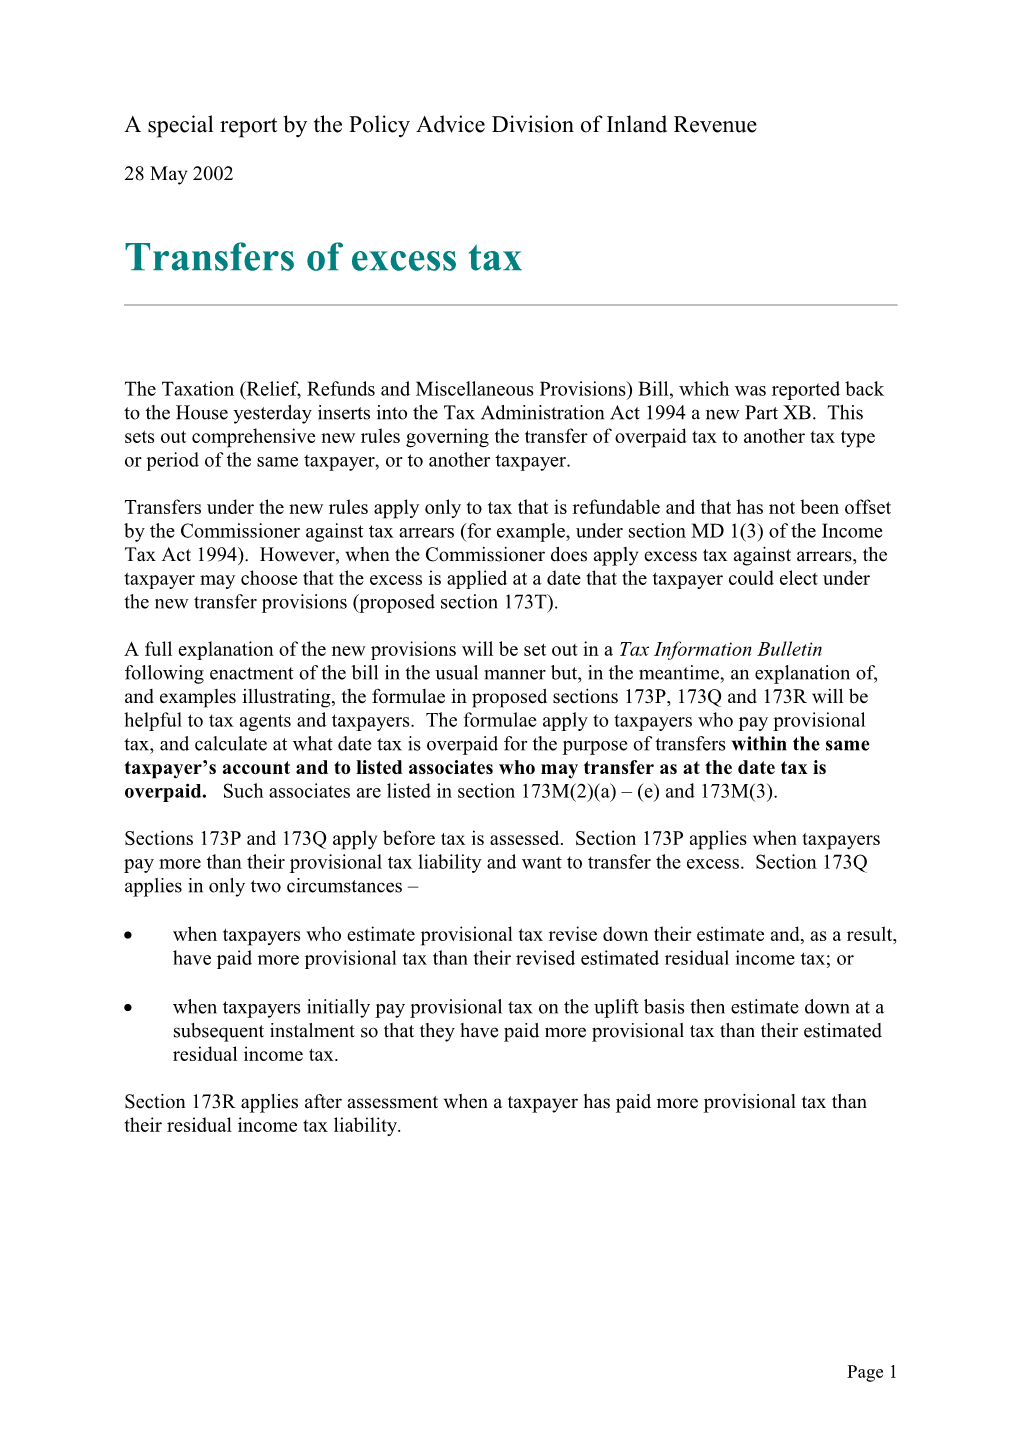 Special Report - Transfers of Excess Tax